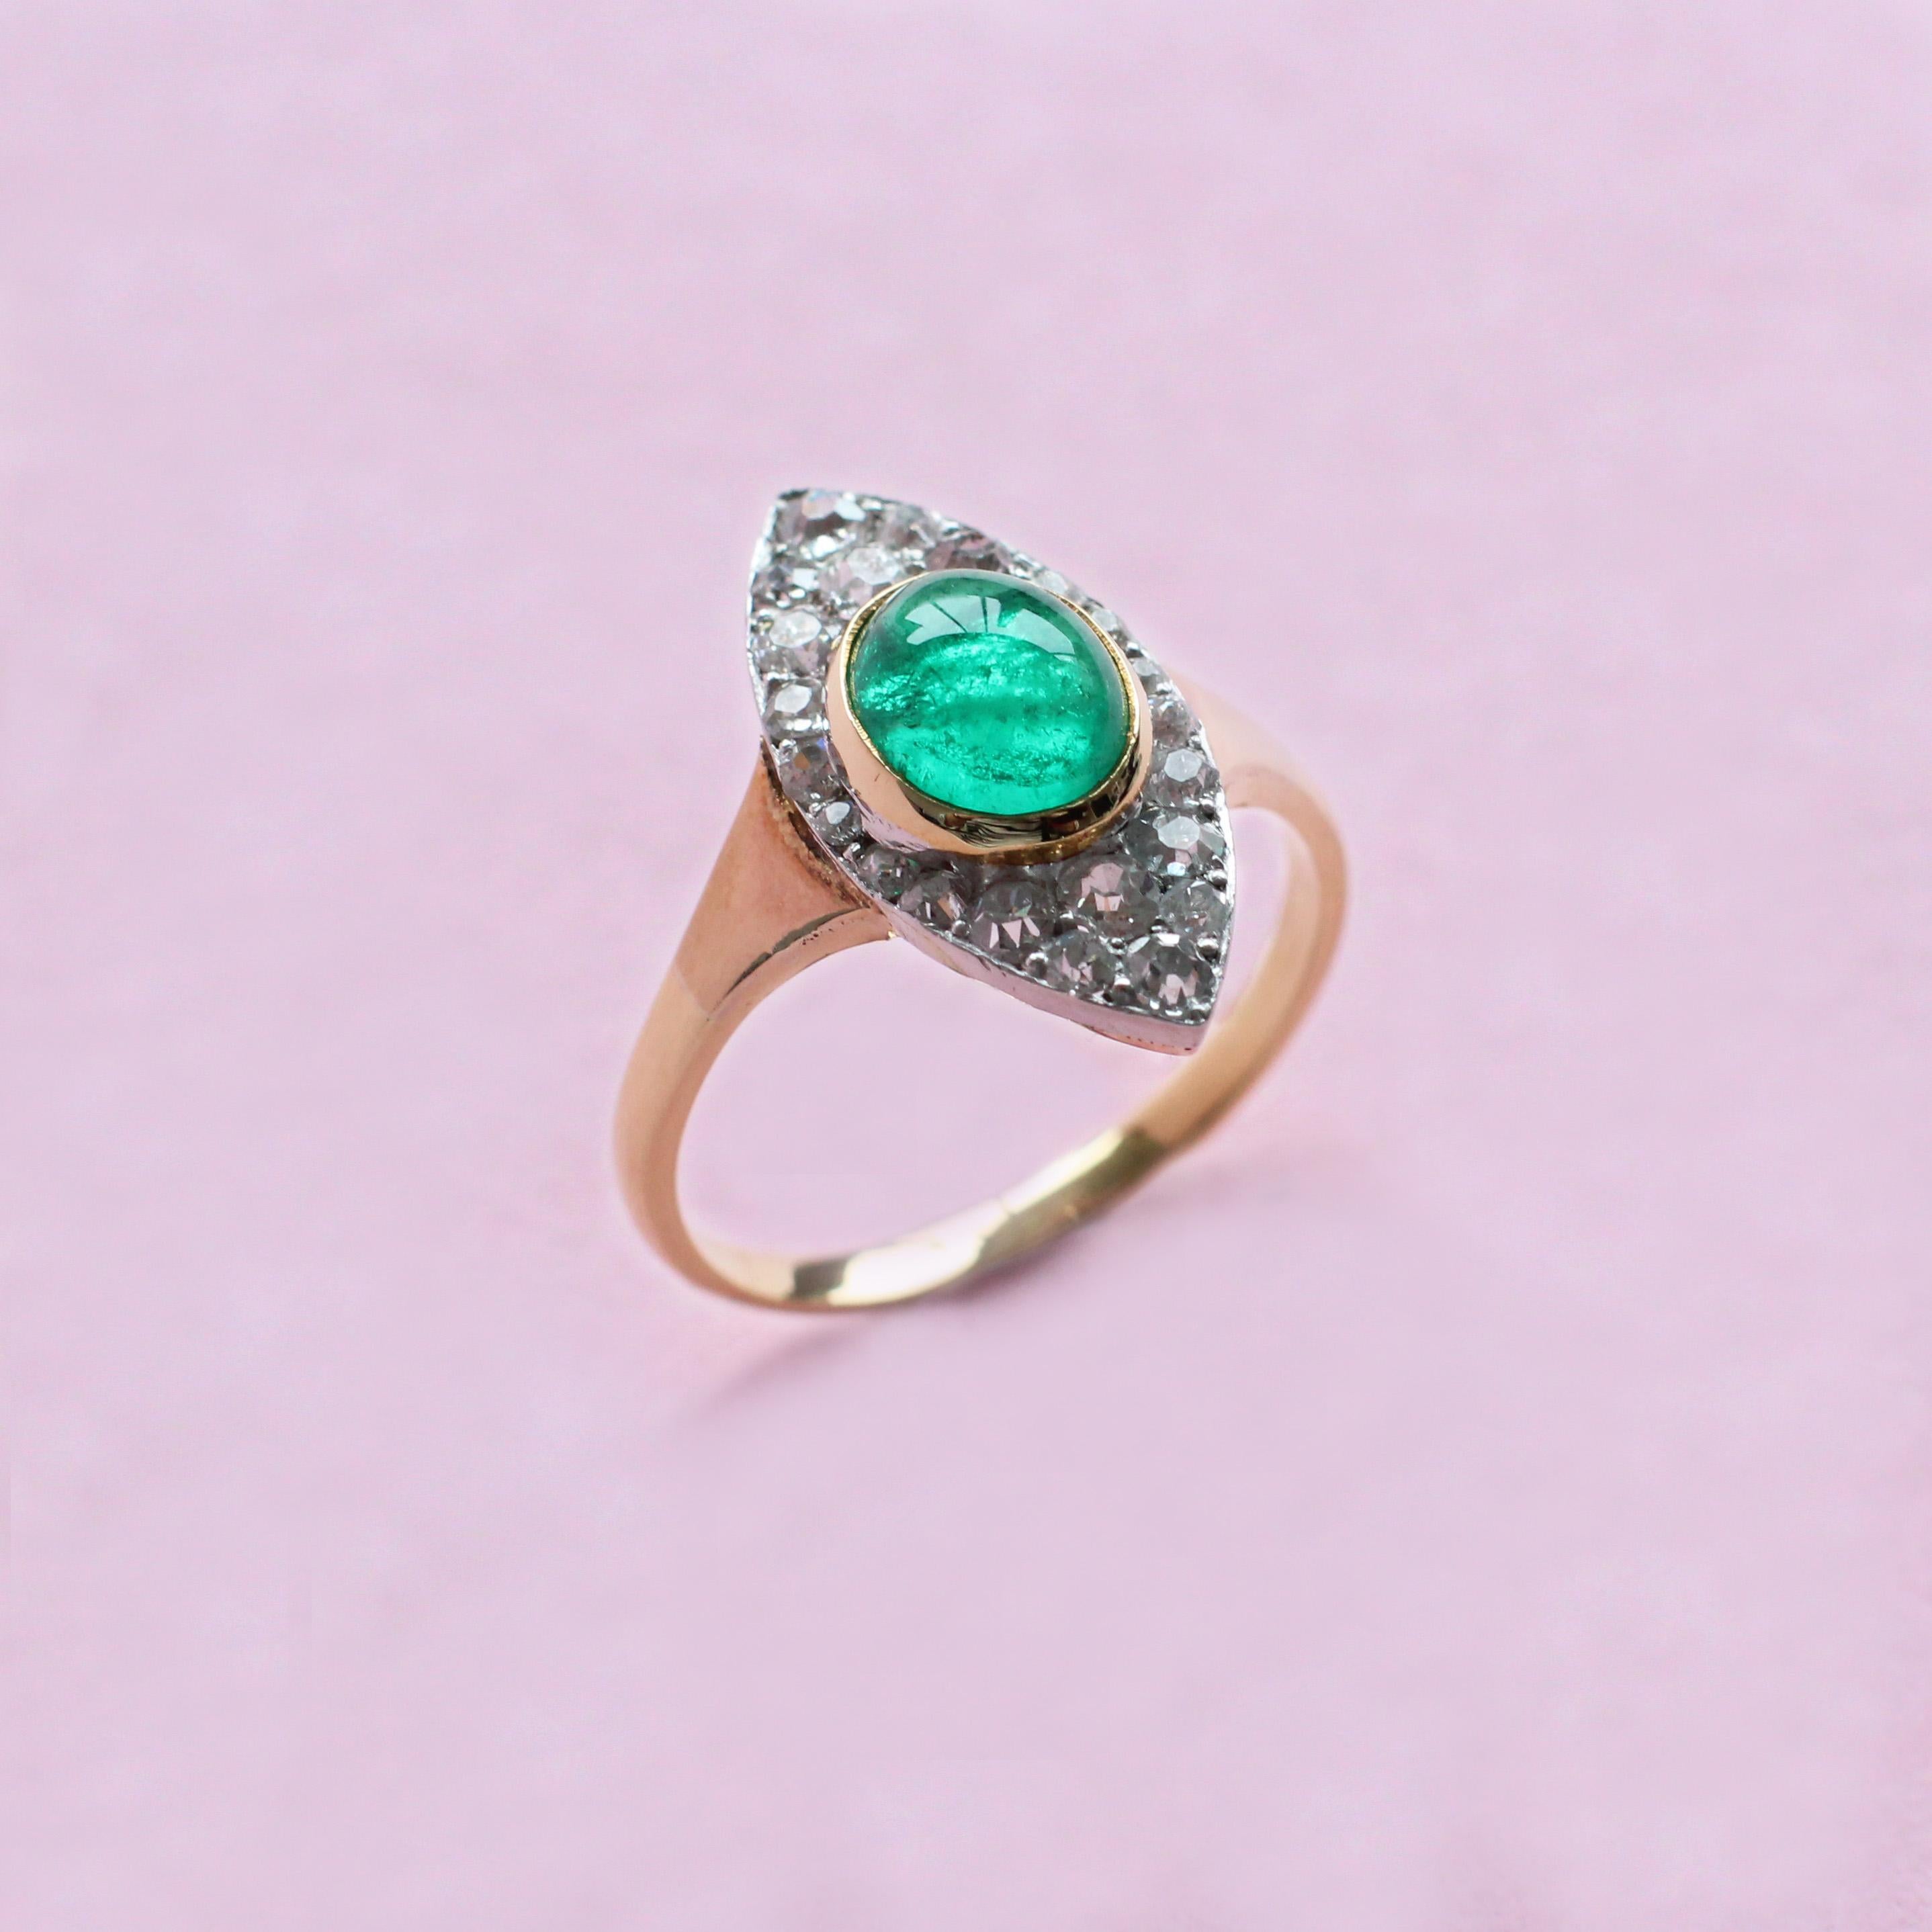 Late Victorian 1.17 Carats Emerald Cabochon Ring with Vintage-Style Diamond Cluster For Sale